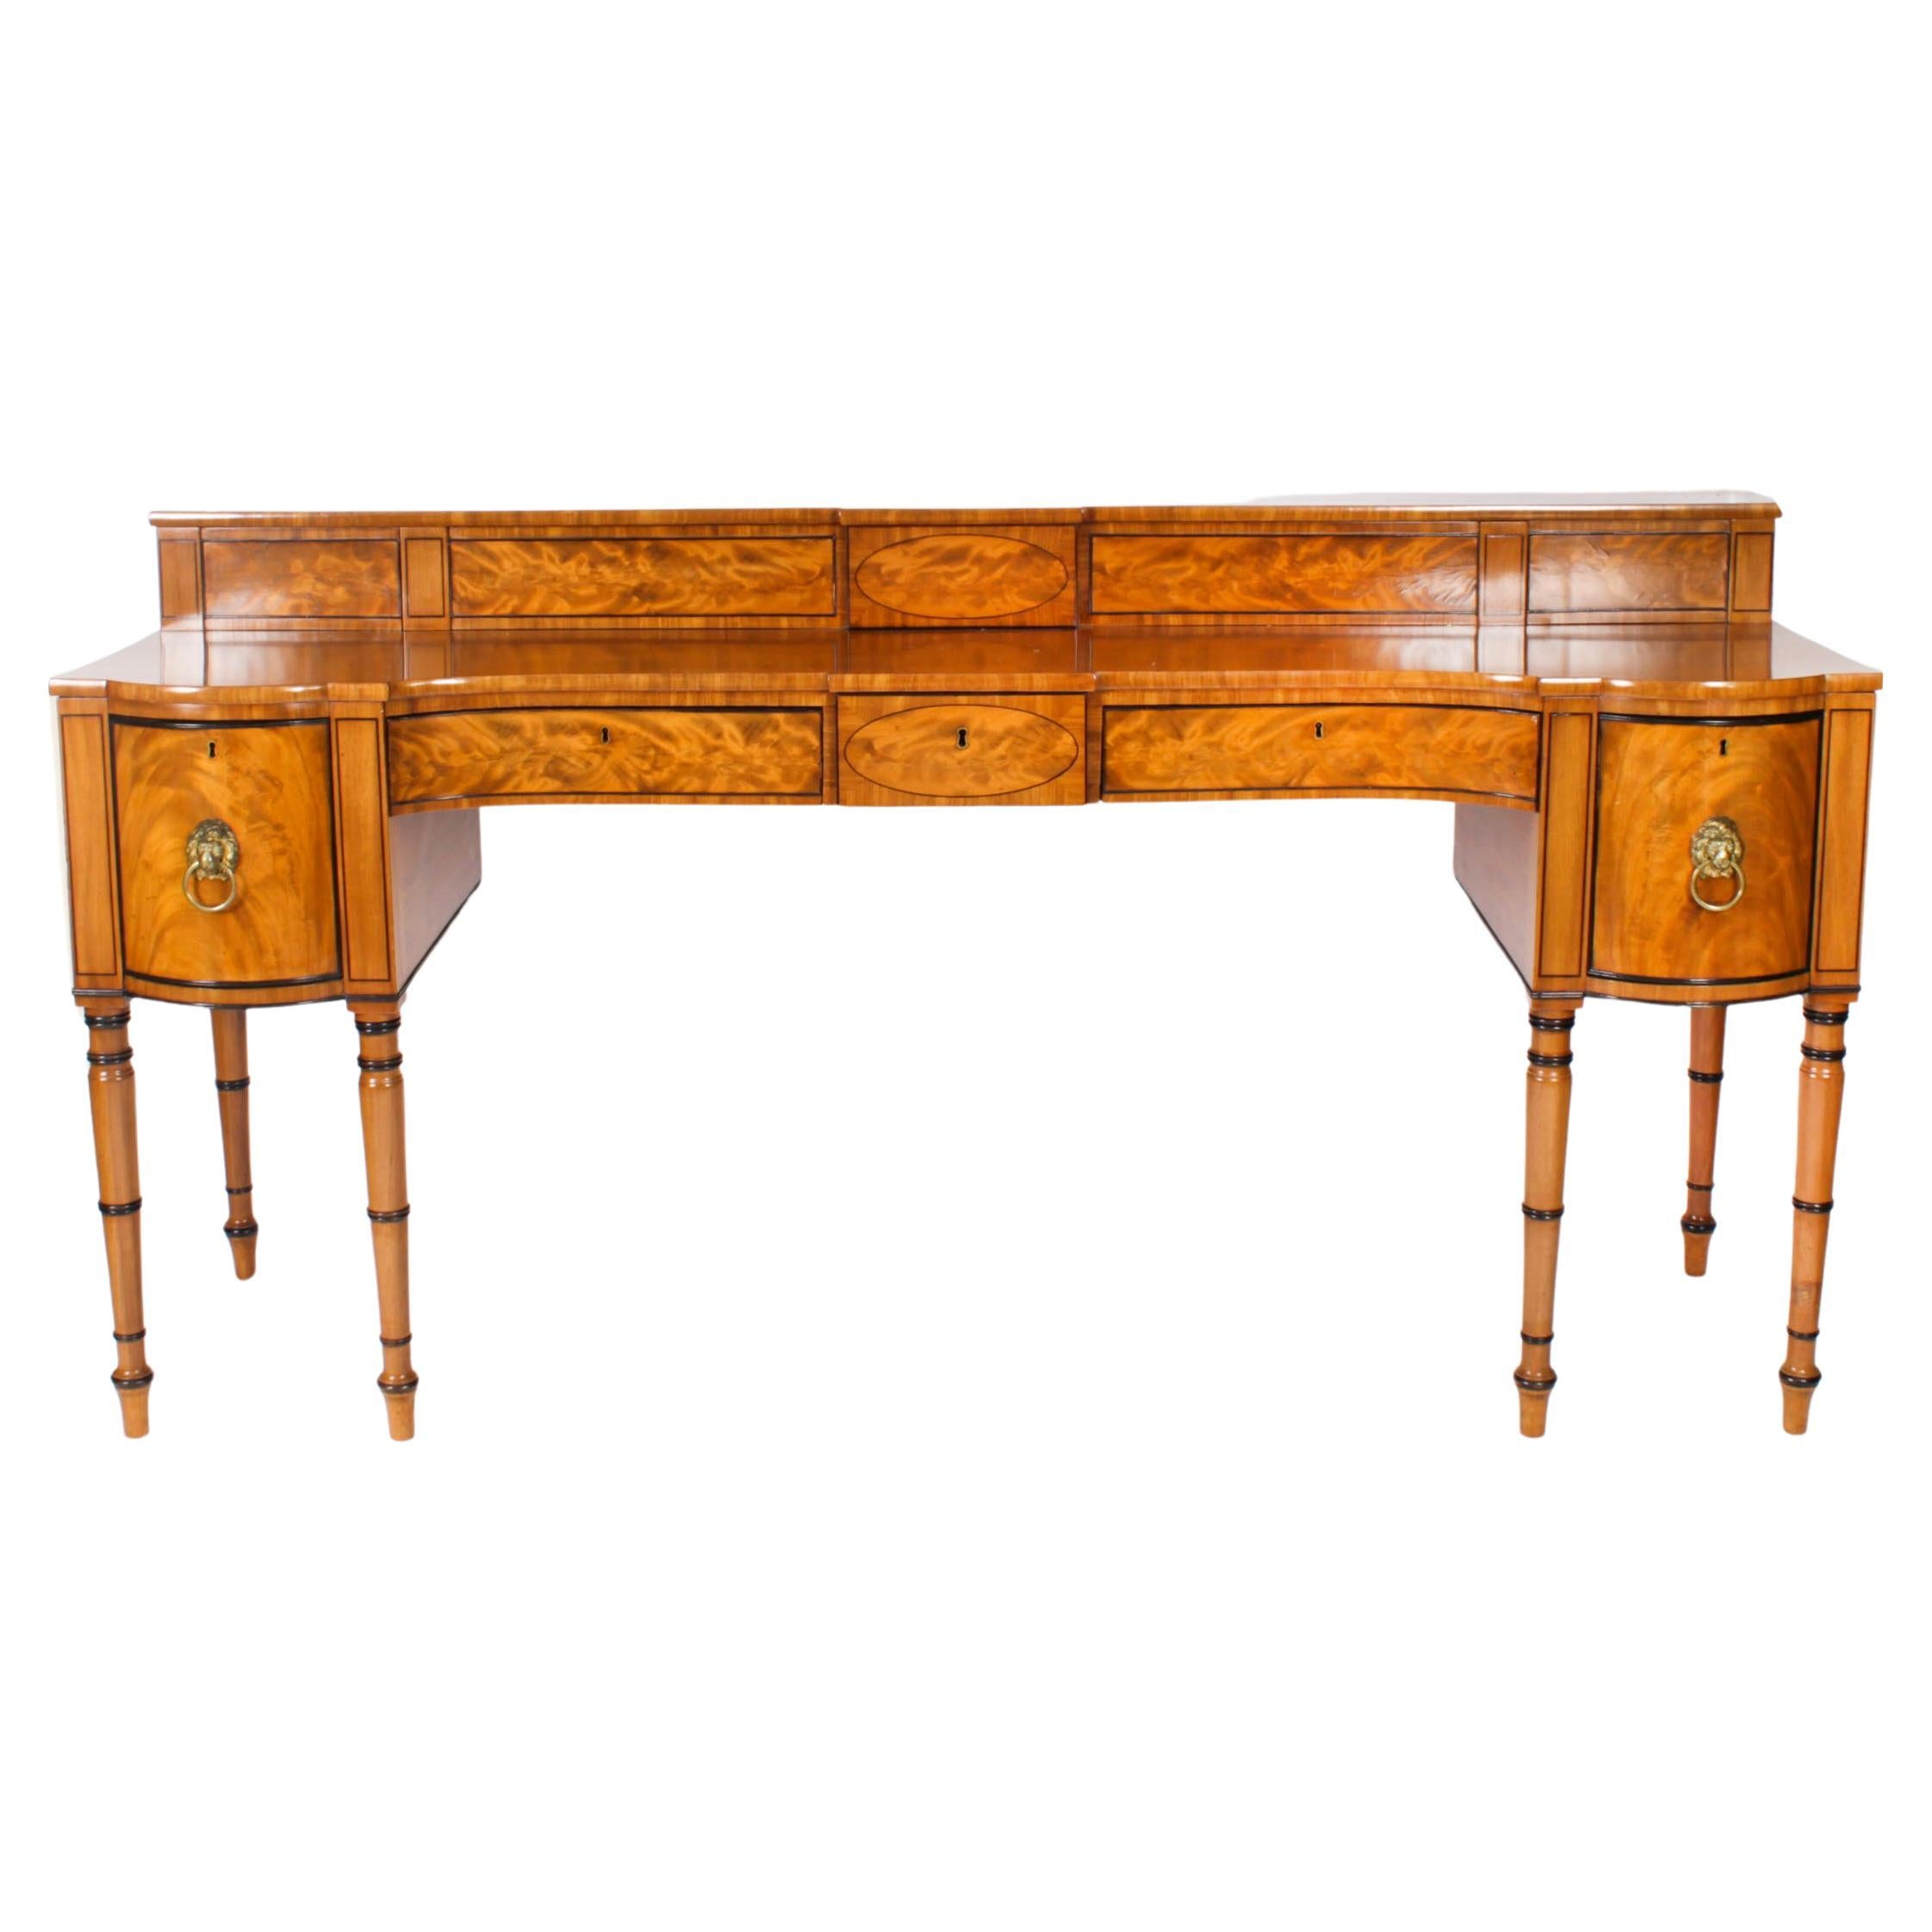 Antique George III Scottish Flame Mahogany Sideboard 19th Century For Sale